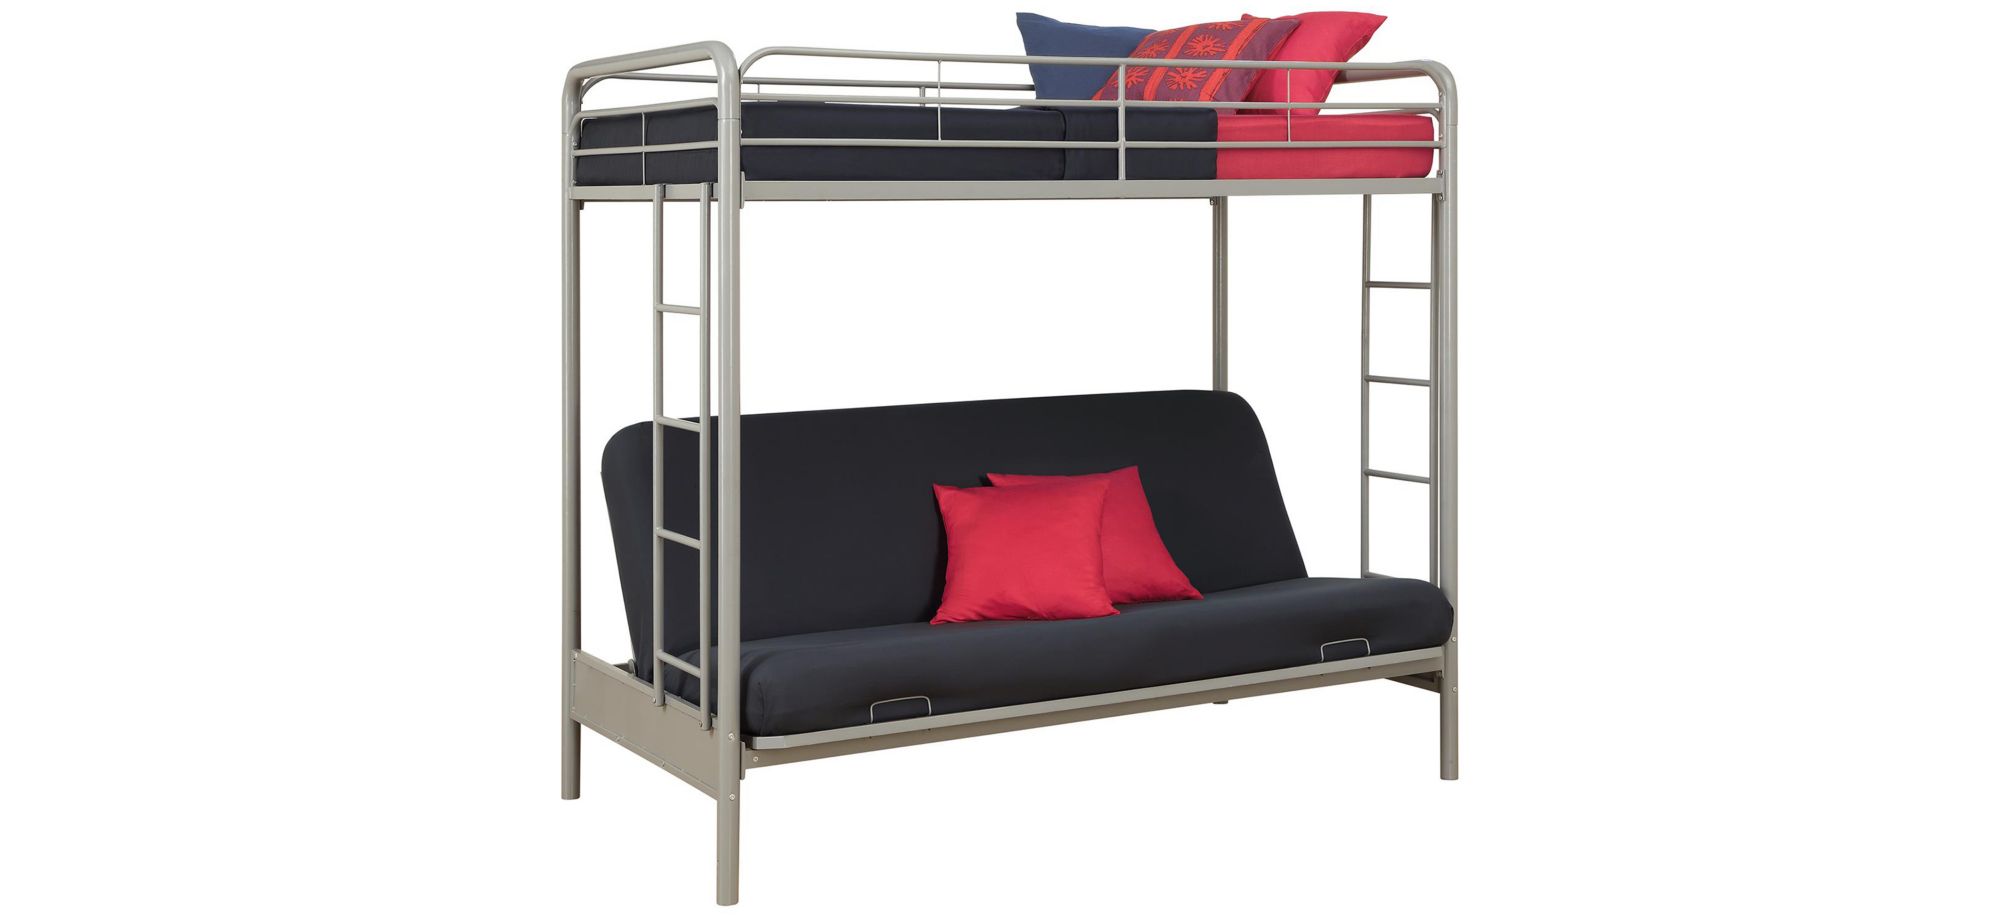 Atwater Living Metal Twin Over Futon Bunk Bed in Silver by DOREL HOME FURNISHINGS